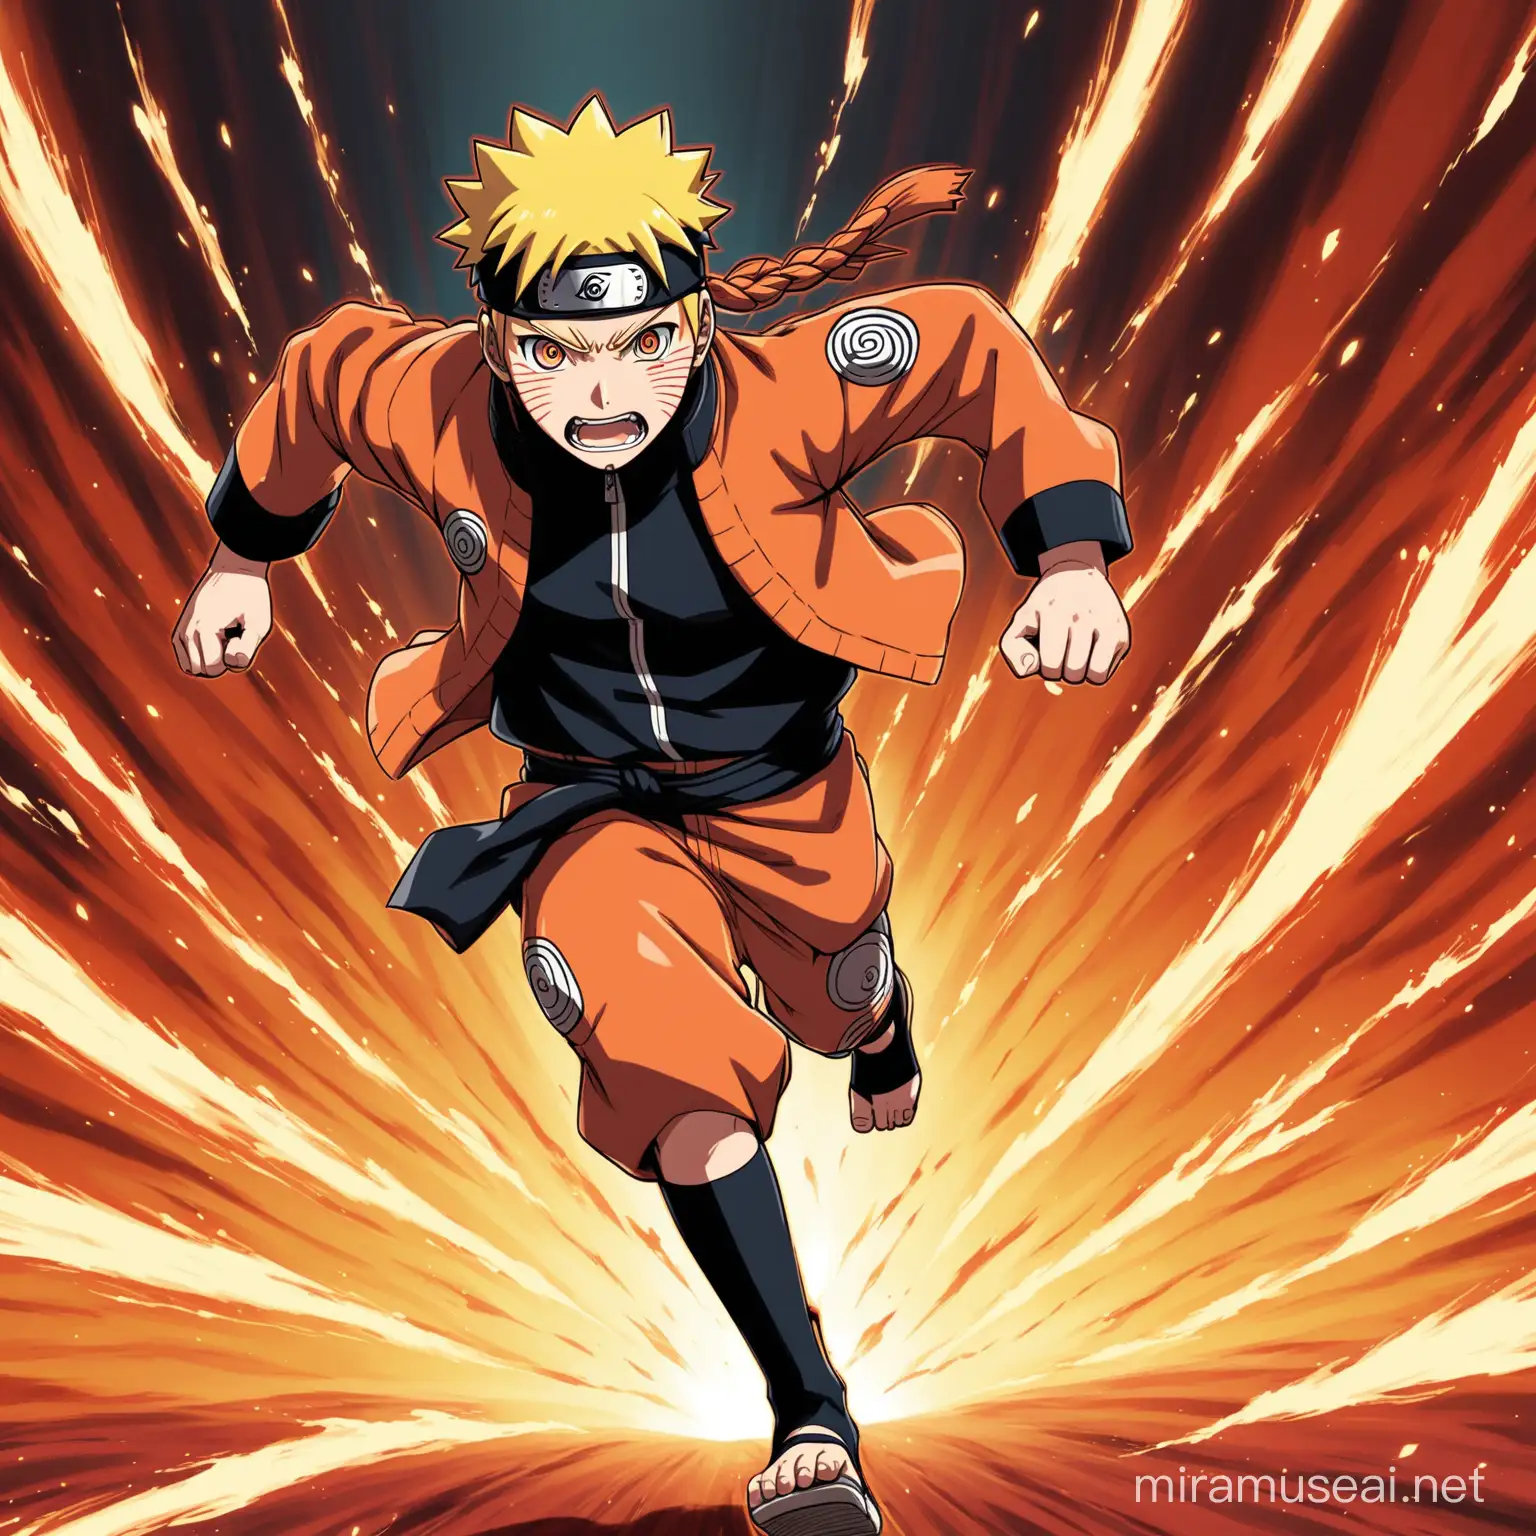 naruto running towards the viewer with rage